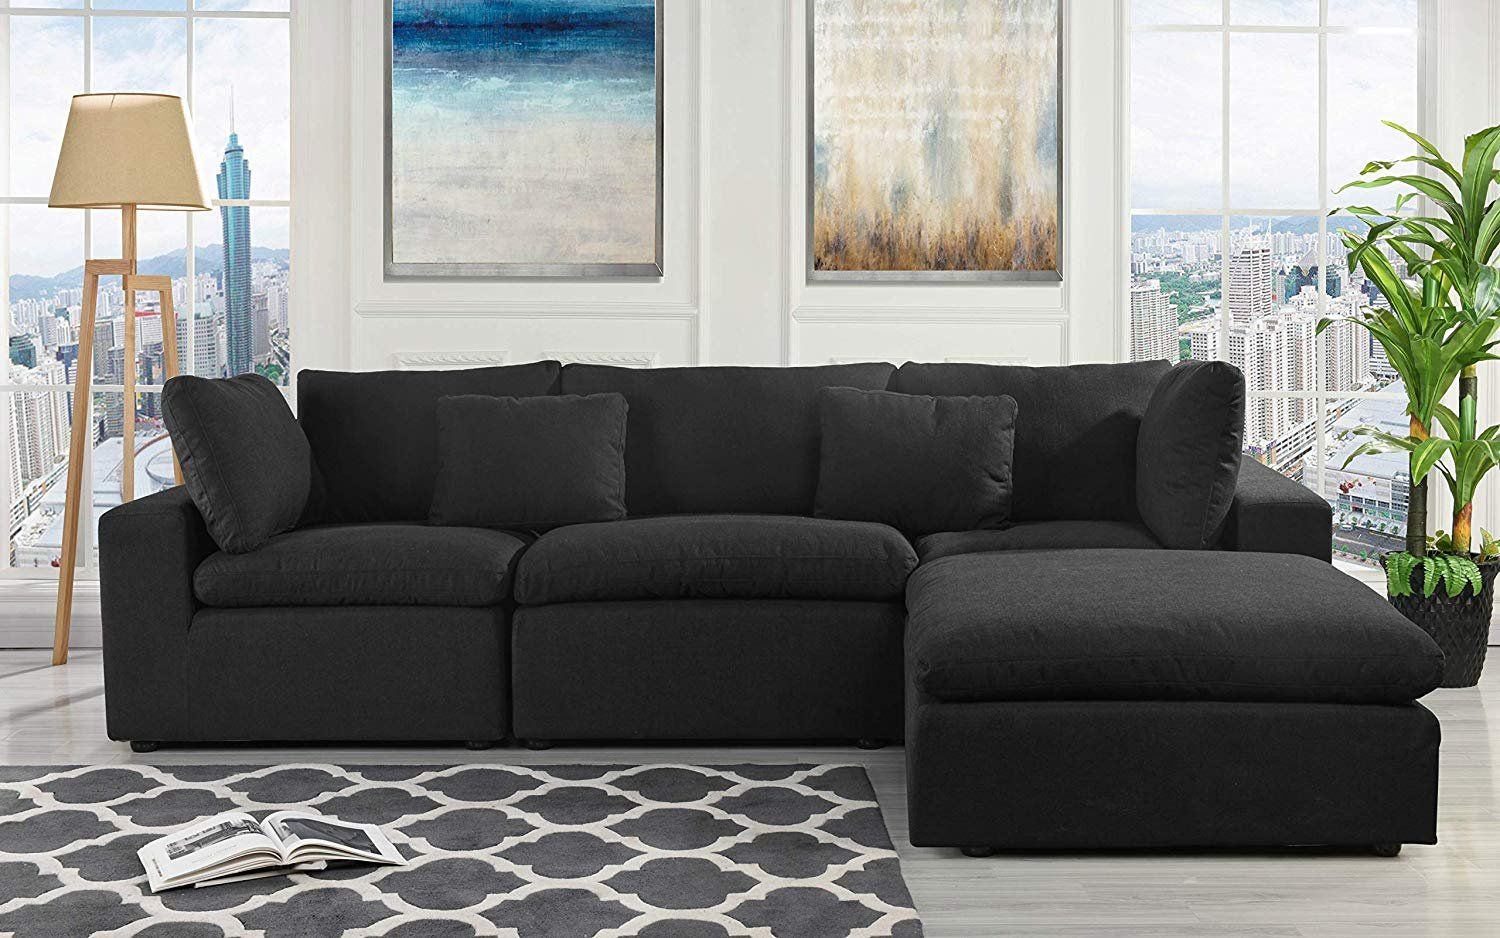 Classic Large Black Fabric Sectional Sofa, L Shape Couch With Wide Intended For Traditional Black Fabric Sofas (View 4 of 21)